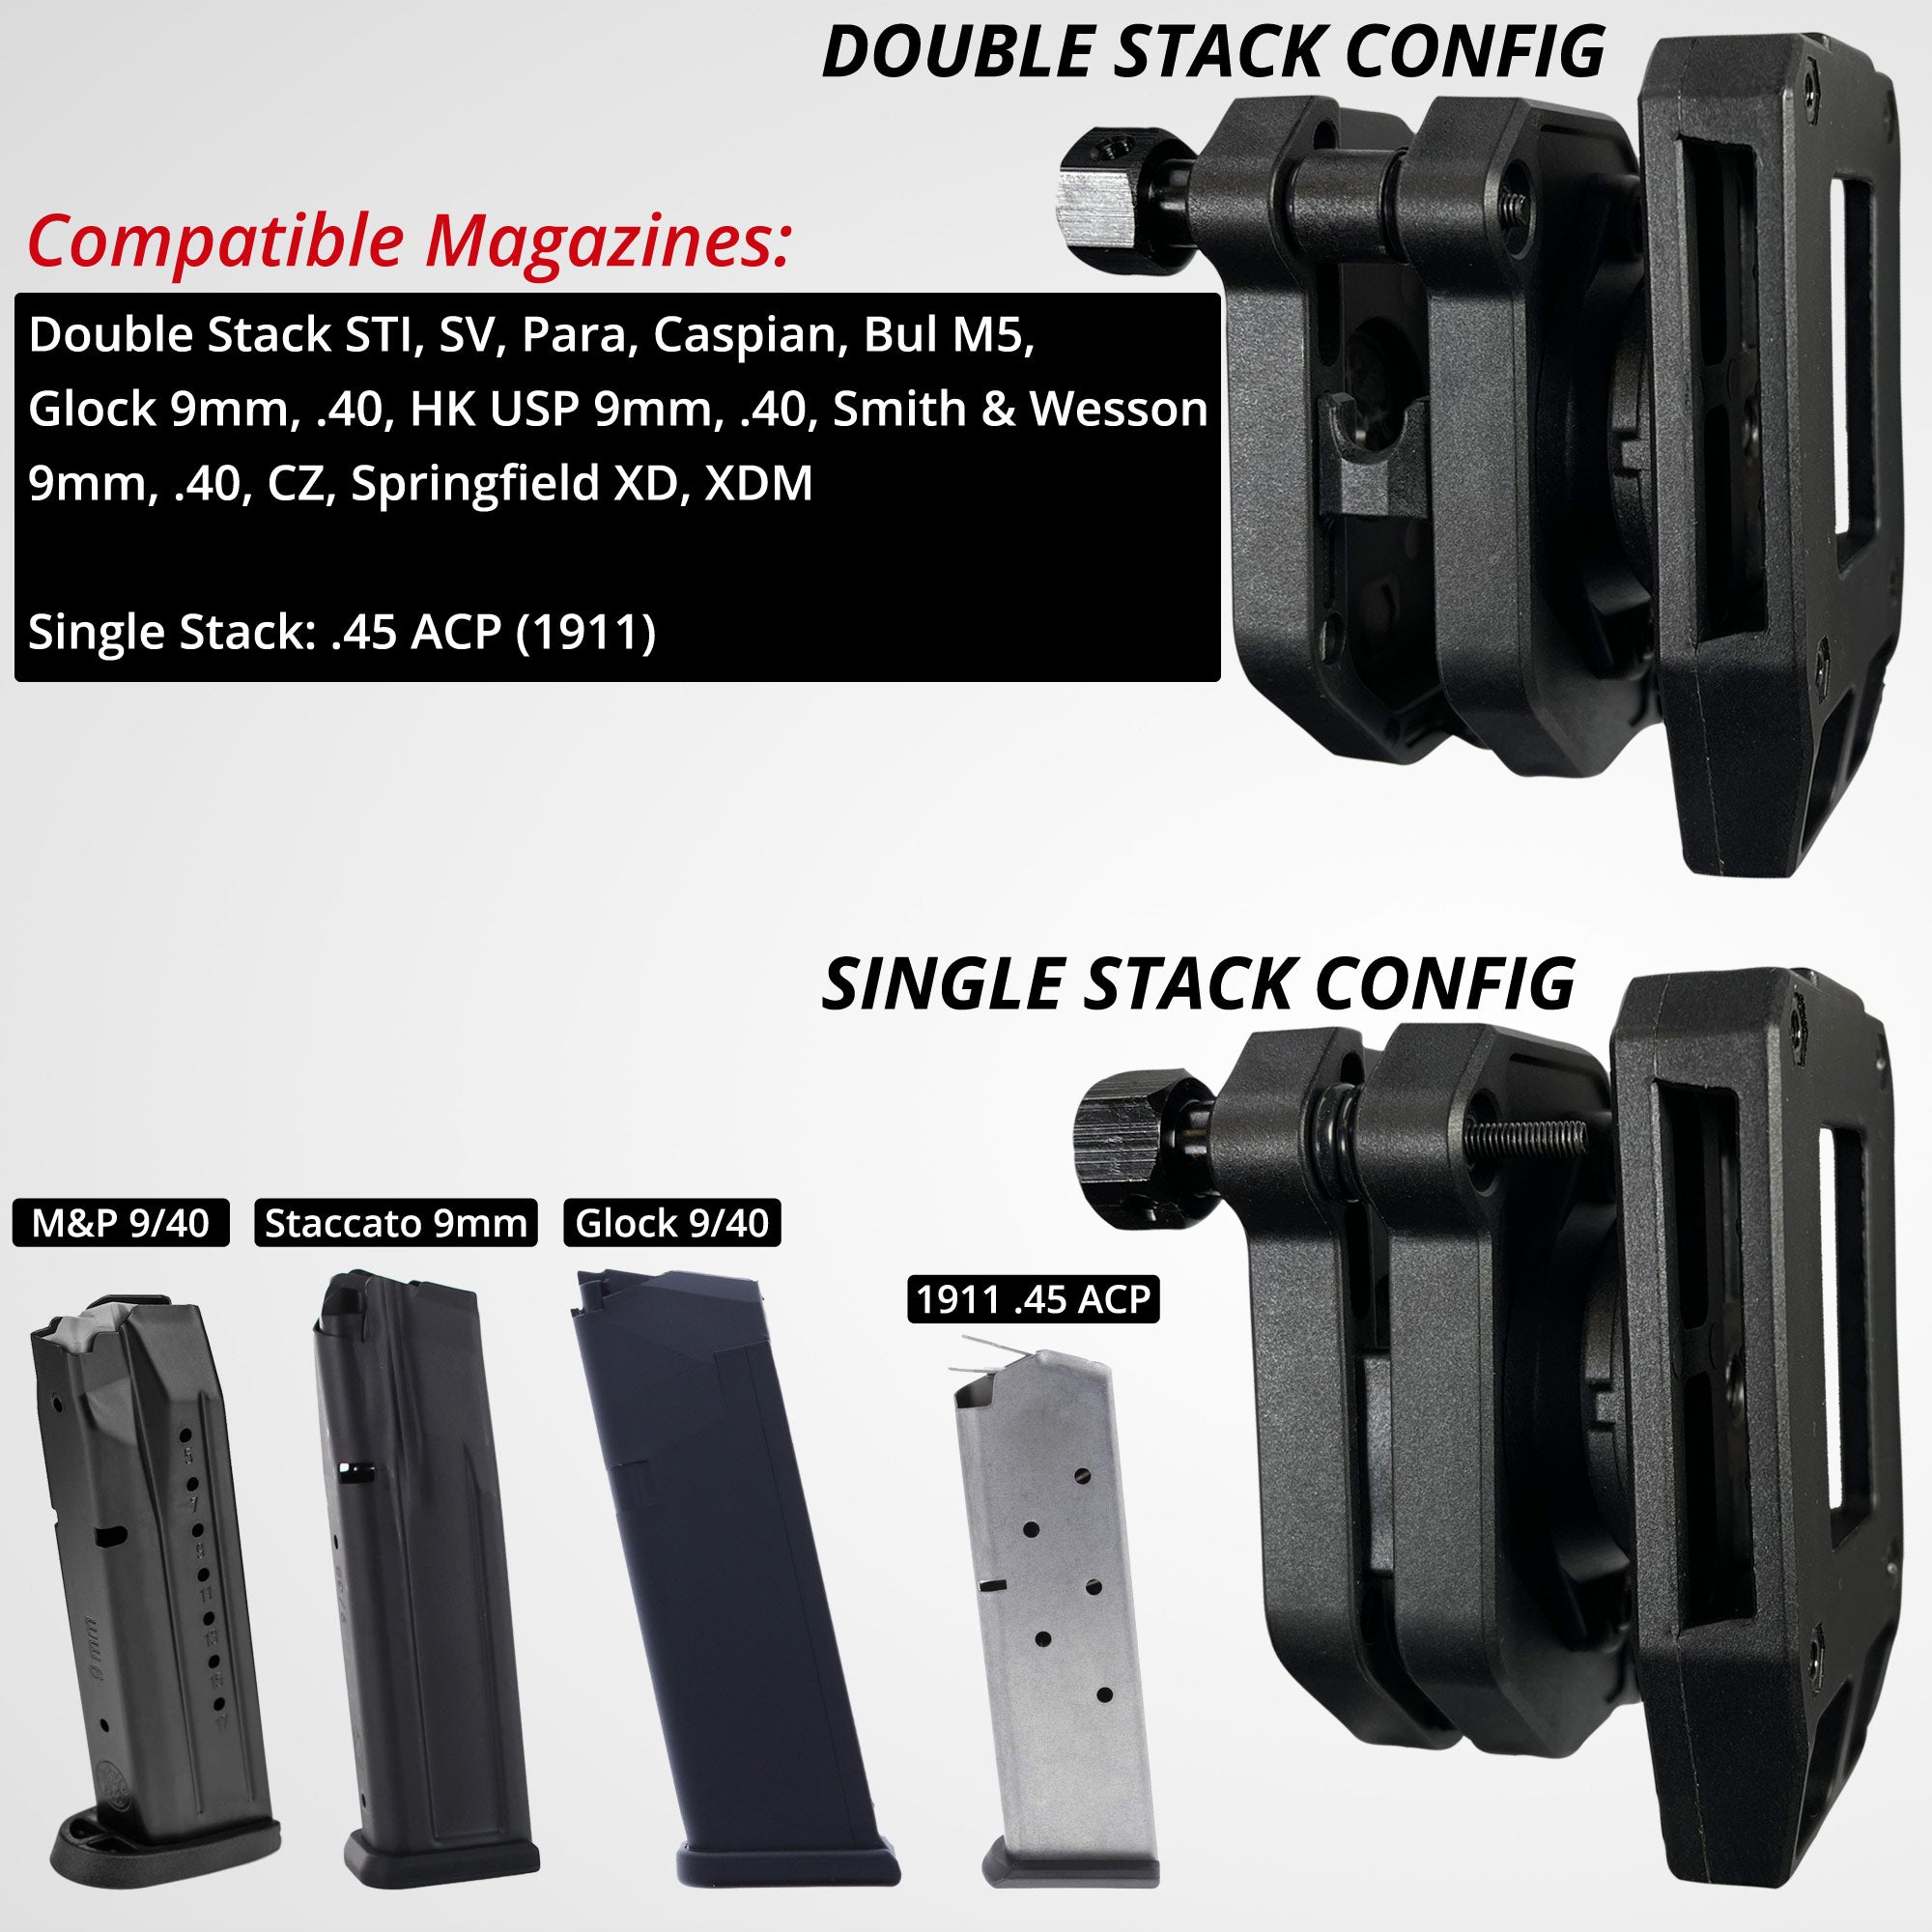 Competition Rig - 1 Heavy Duty Belt w/ 3 Ambidextrous Single/Double Stack Magazine Pouches and 1 Magnetic Magazine Pouch